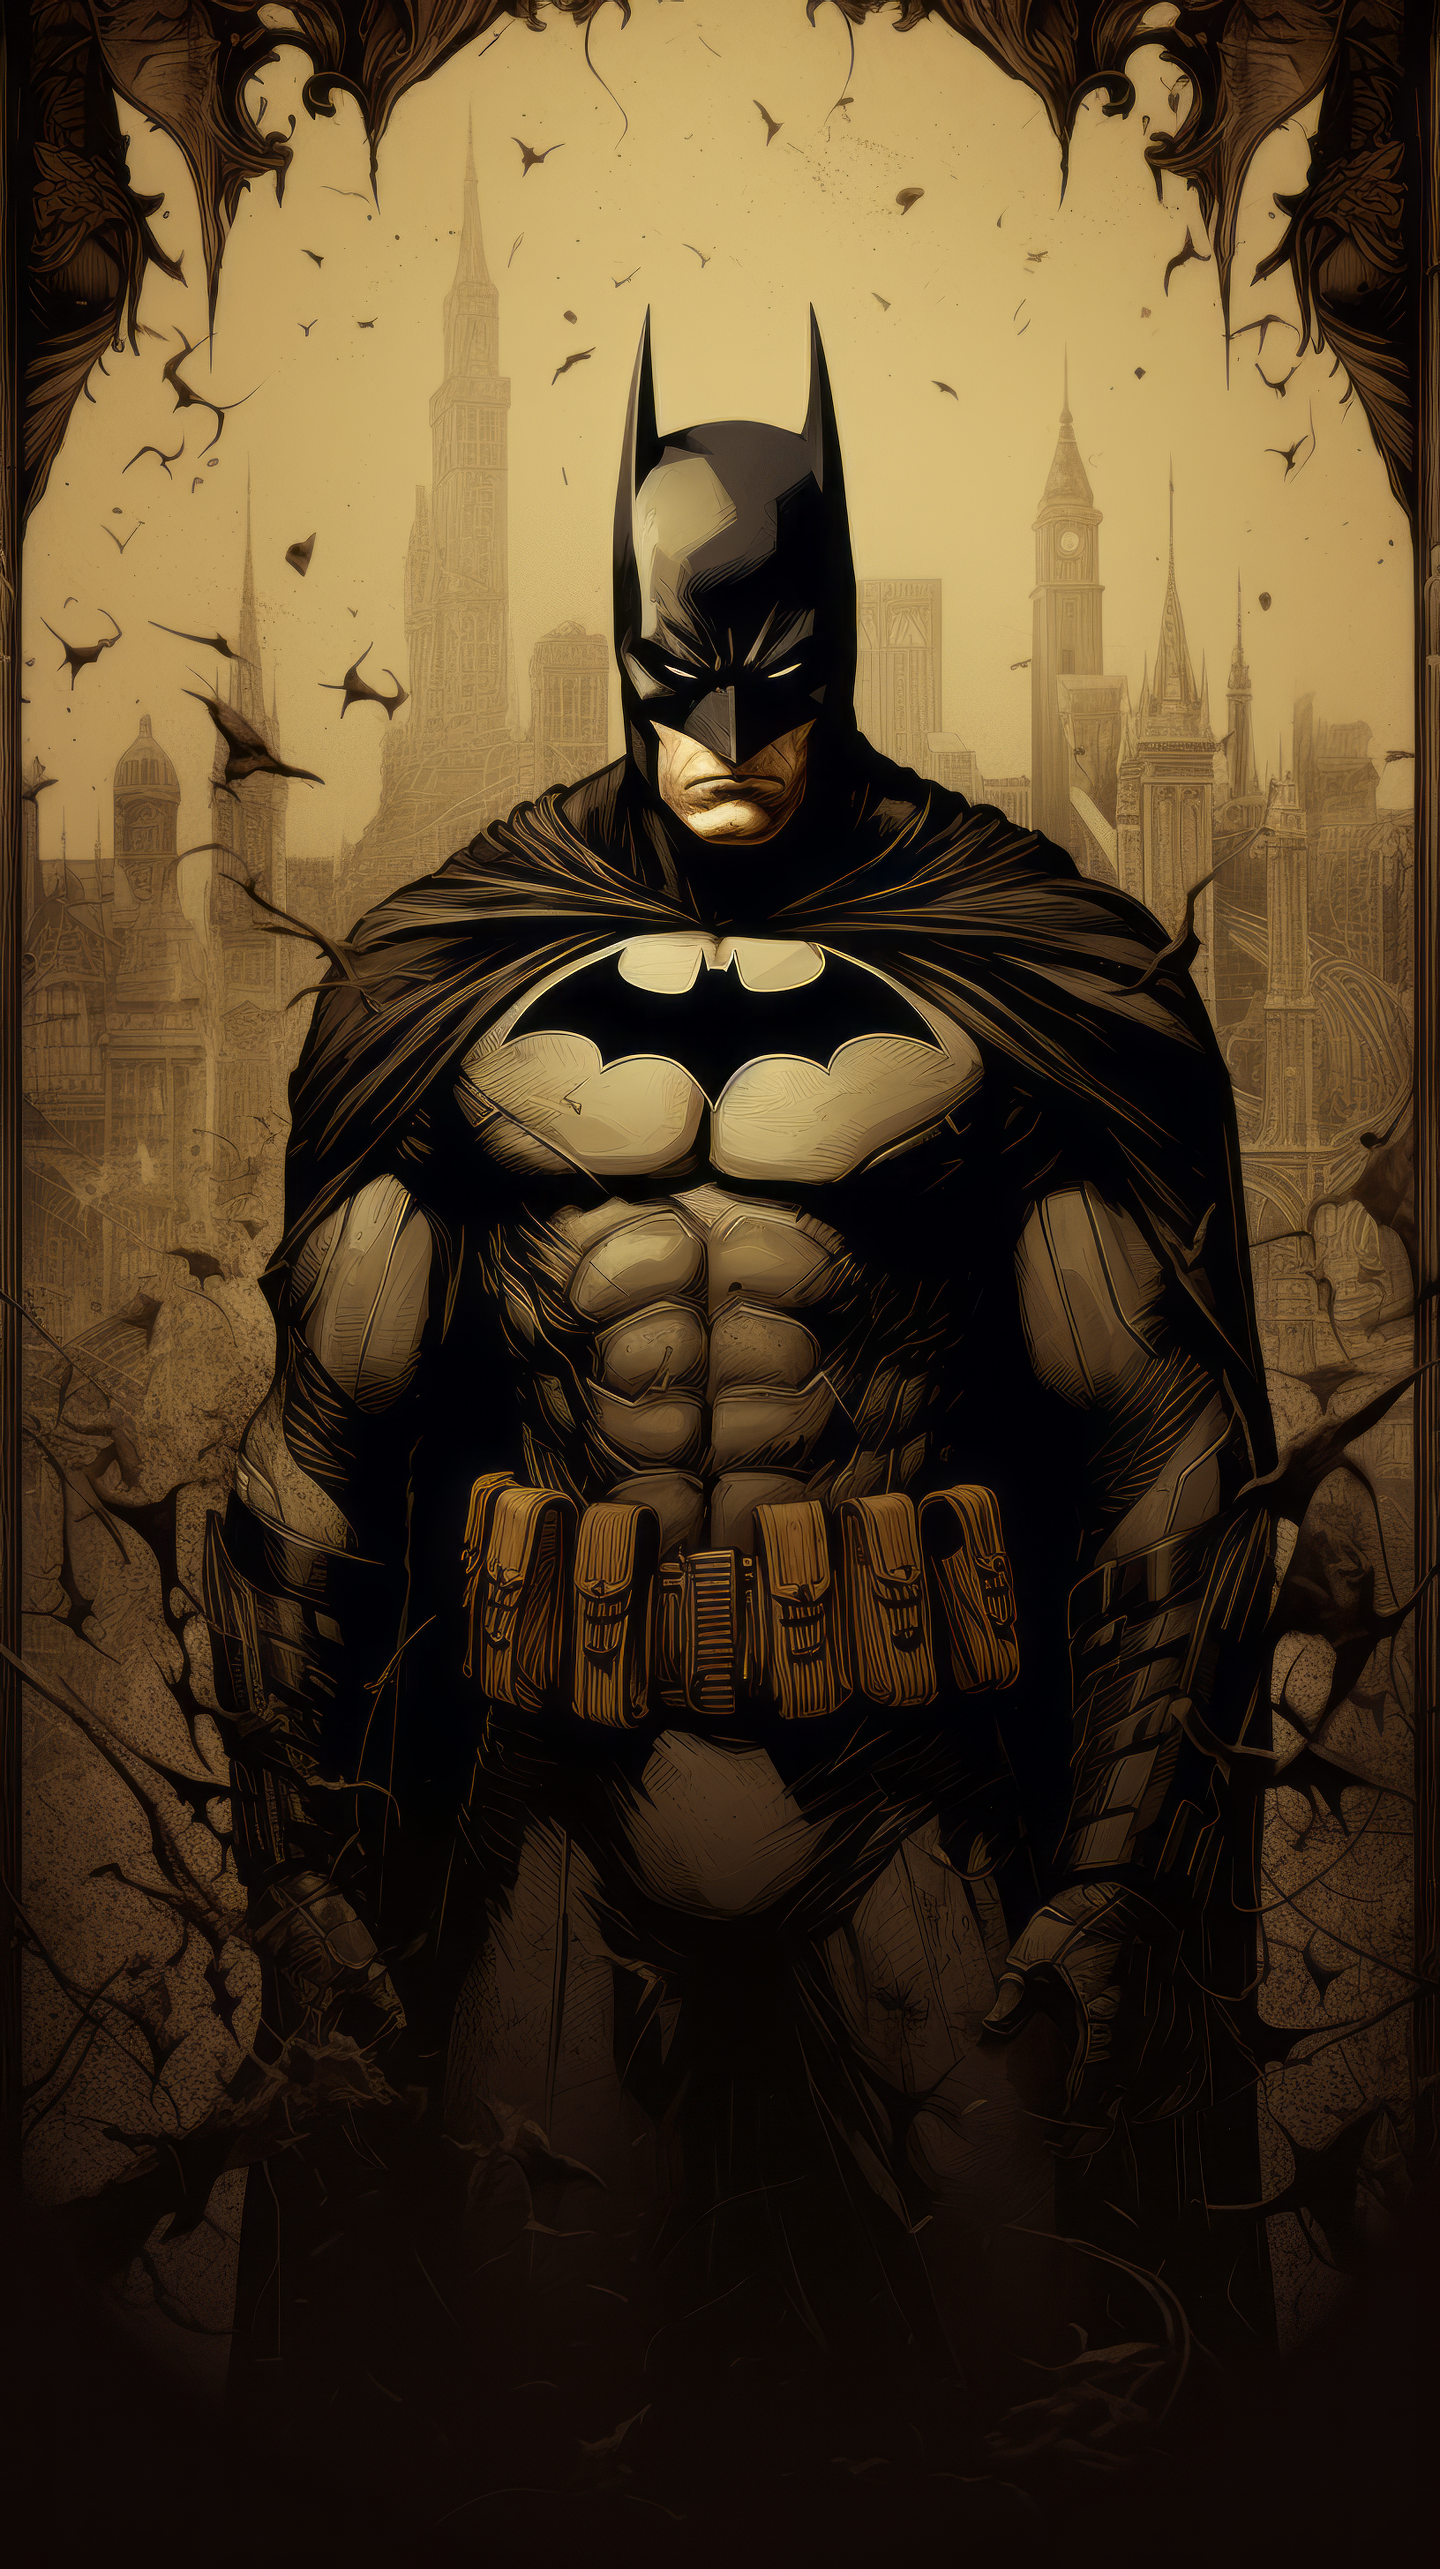 Need a new phone wallpaper. Post your best batman wallpapers! : r